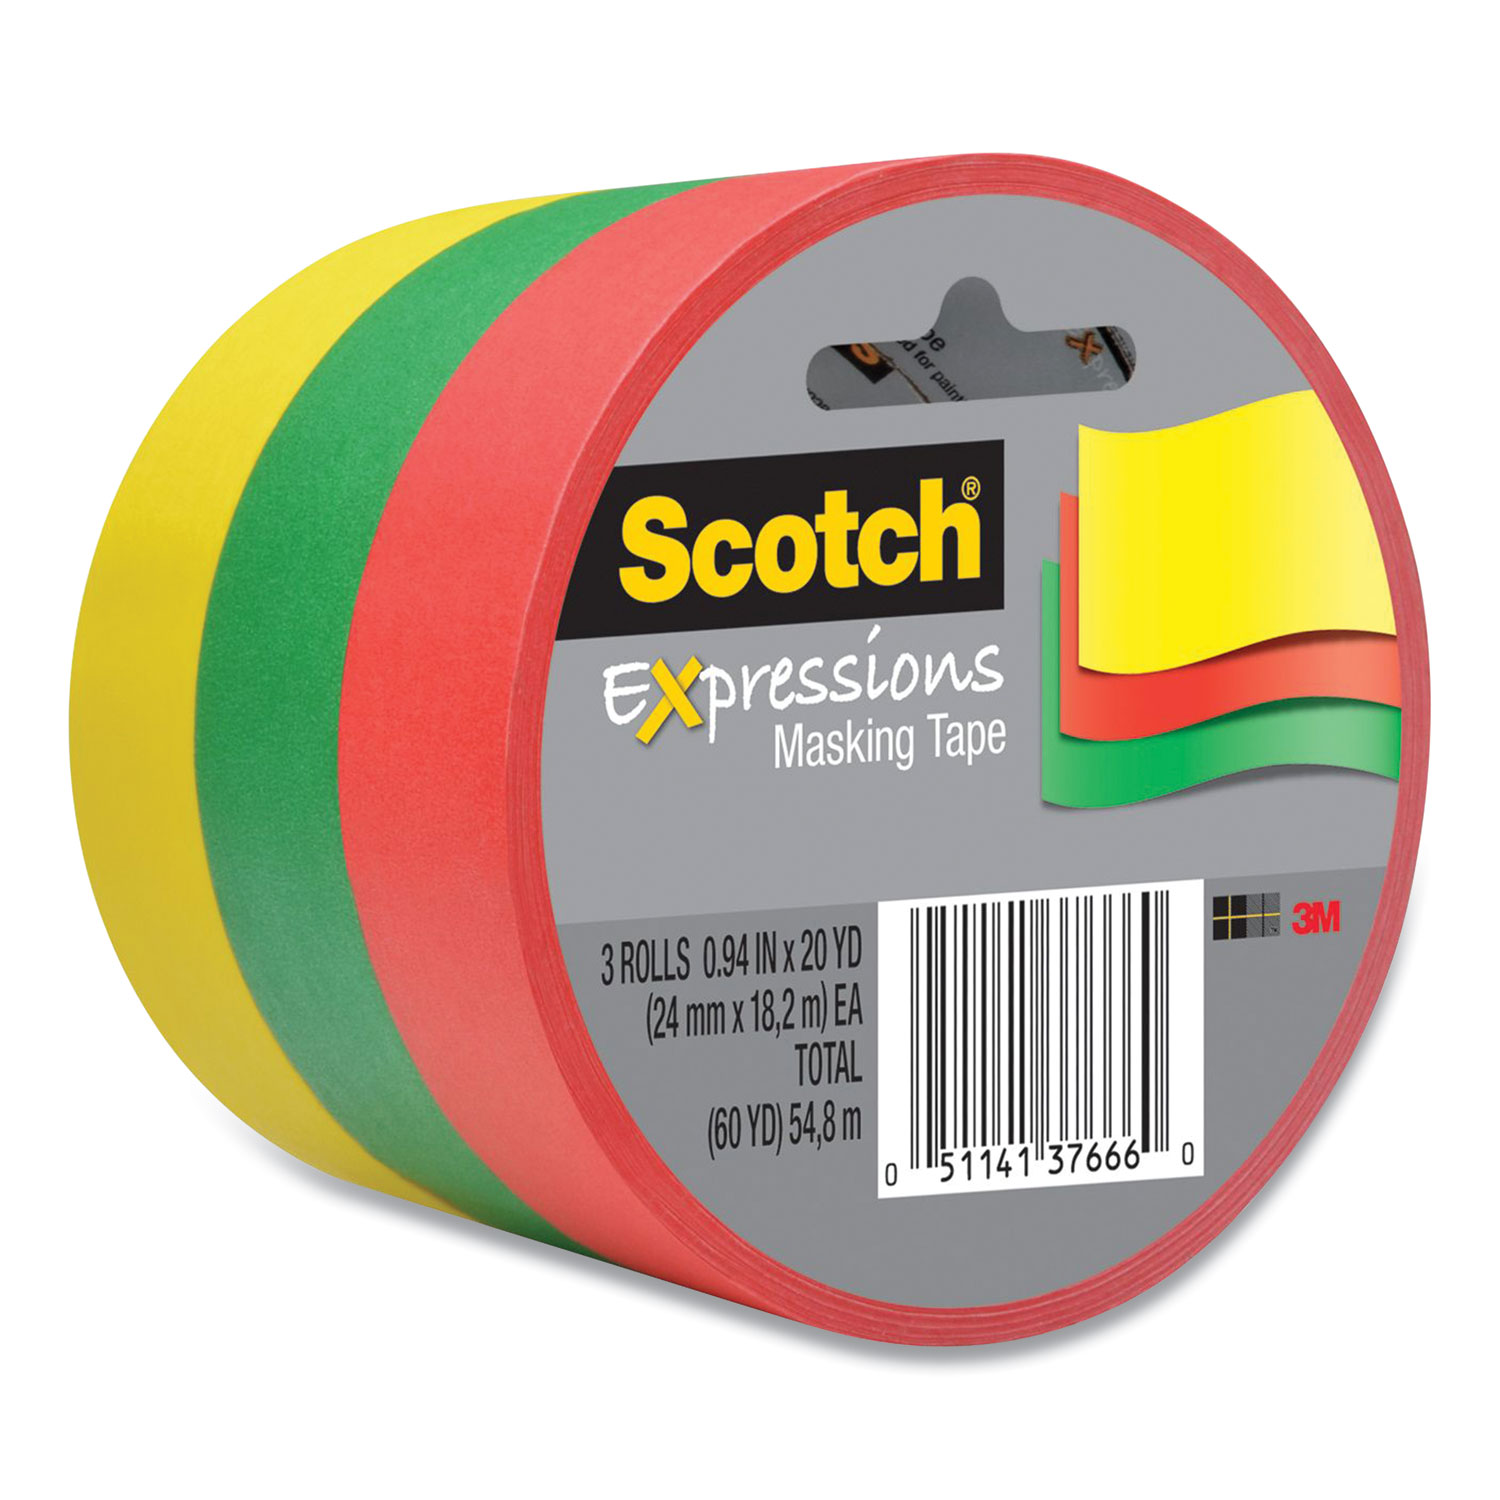  Scotch 3437-3PRM Expressions Masking Tape, 3 Core, 0.94 x 20 yds, Red, Green, Yellow, 3 Rolls/Pack (MMM200573) 